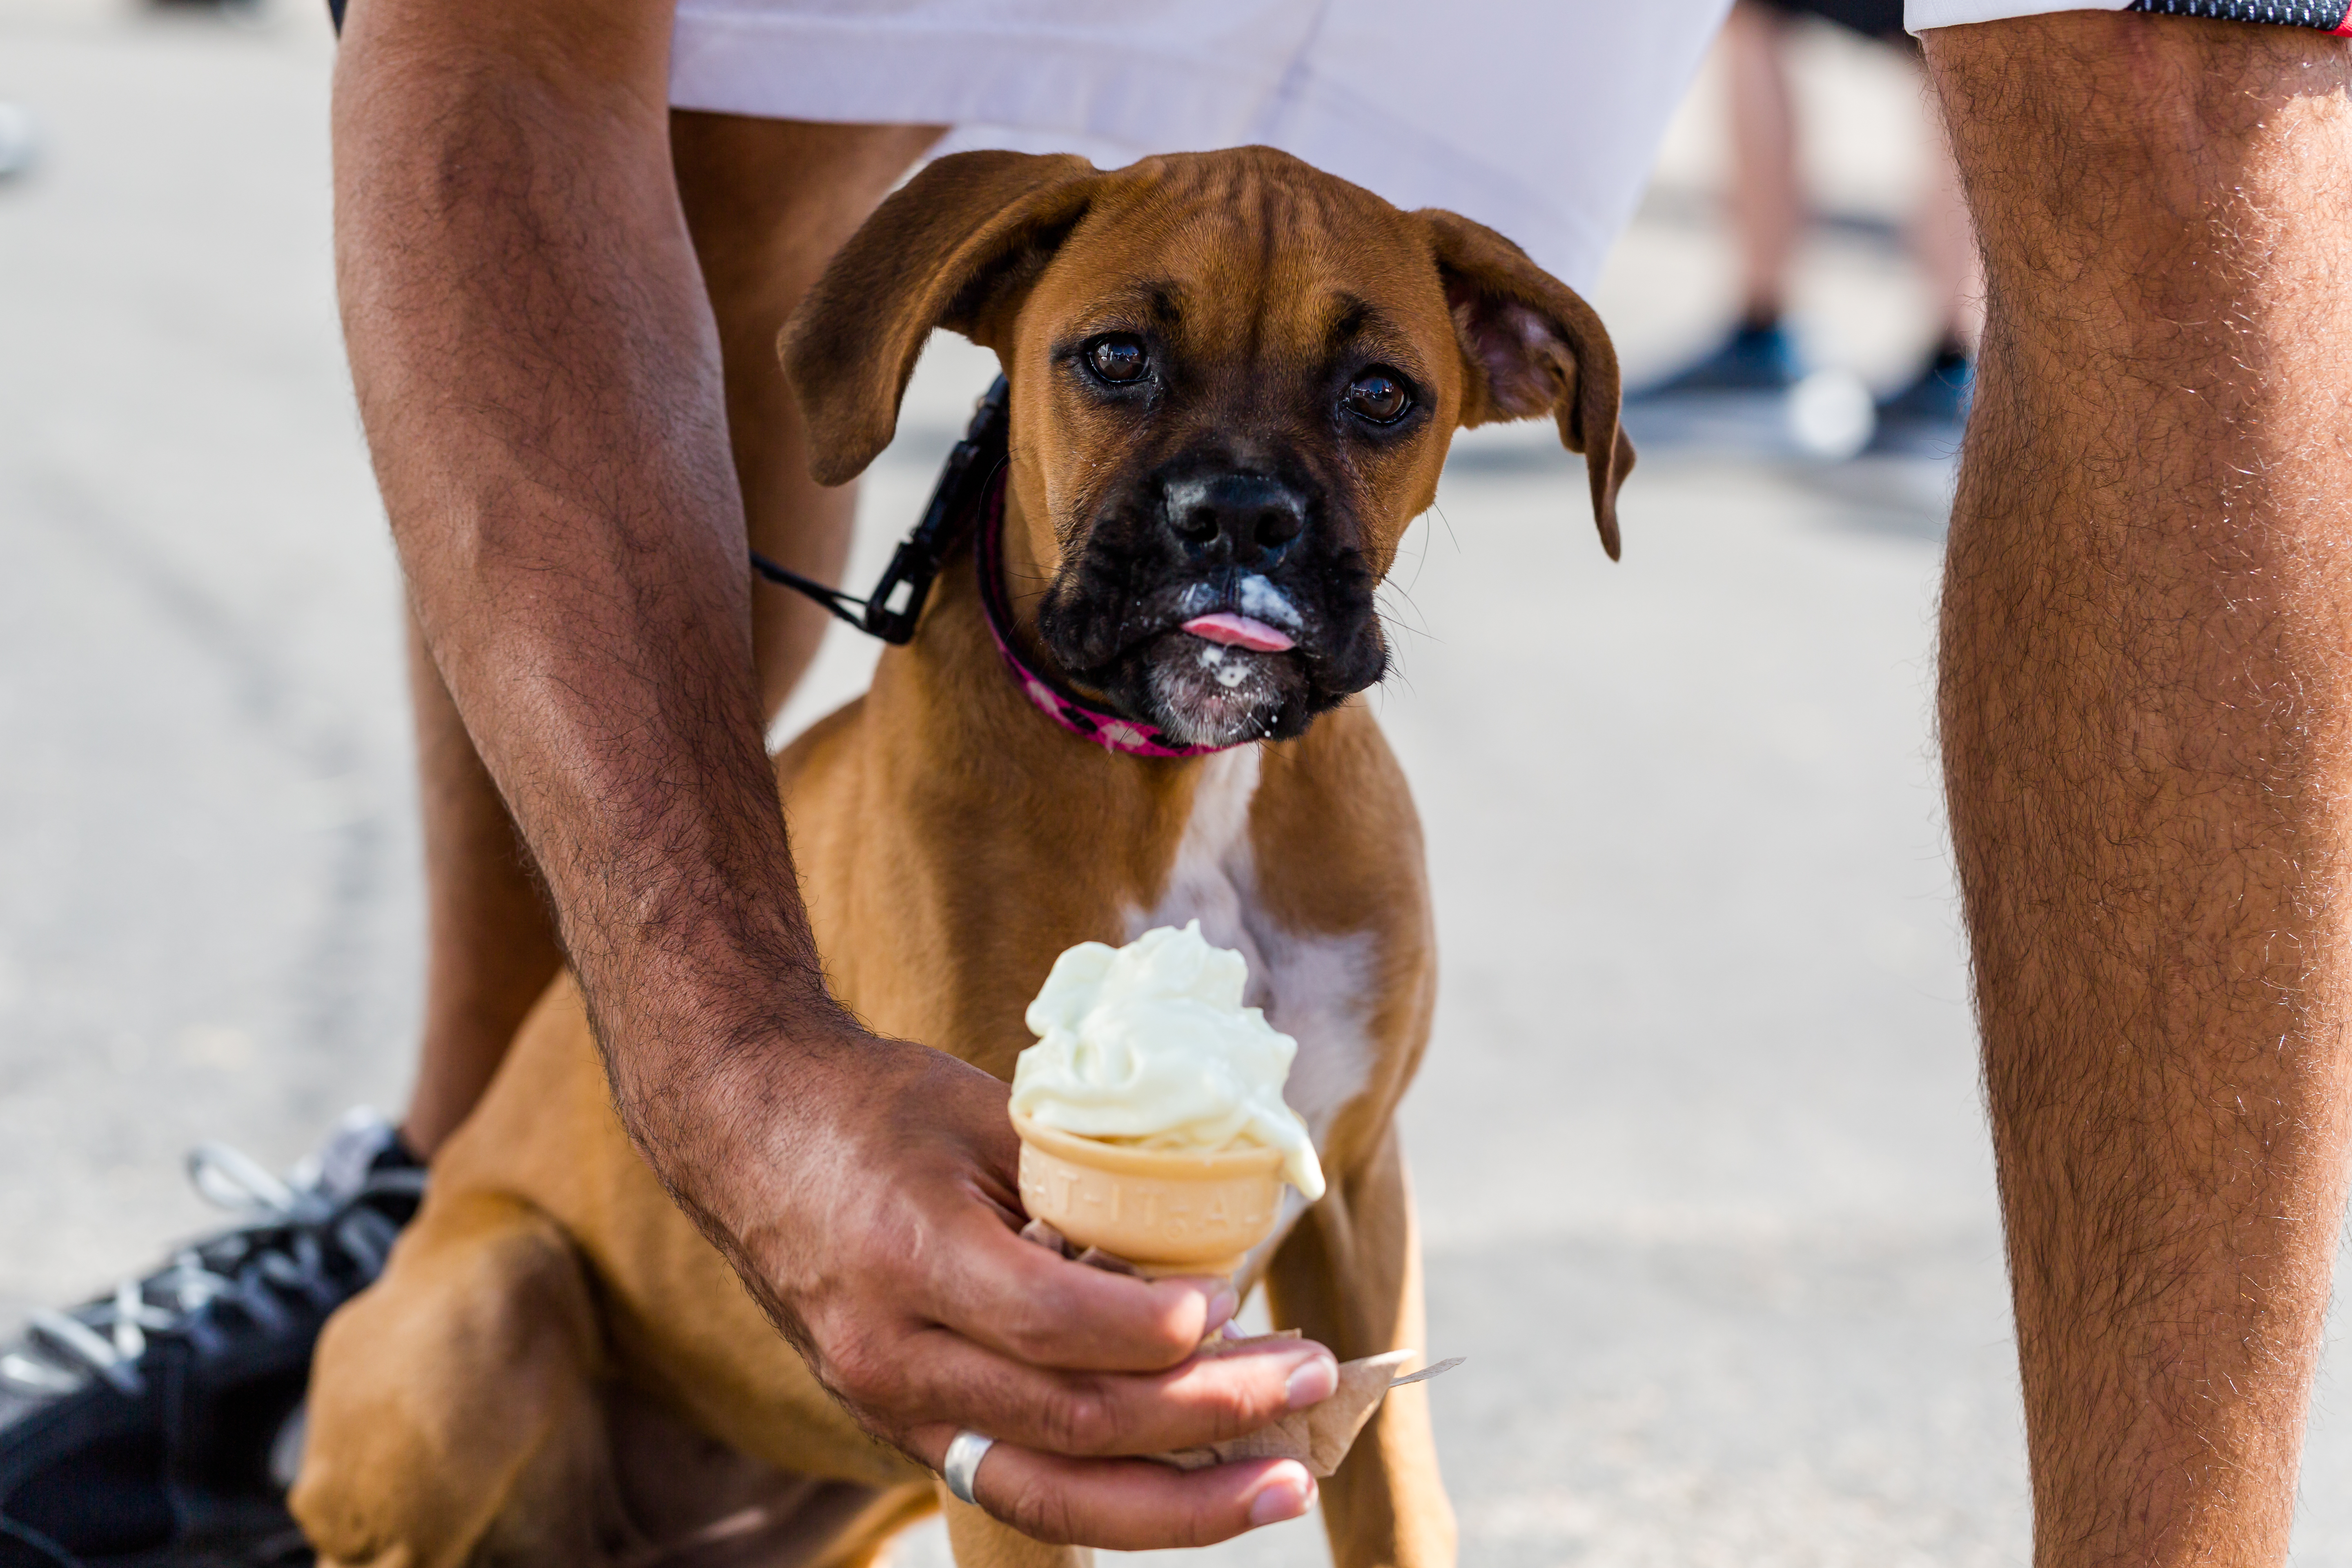 Dog with ice cream waiting to eat it